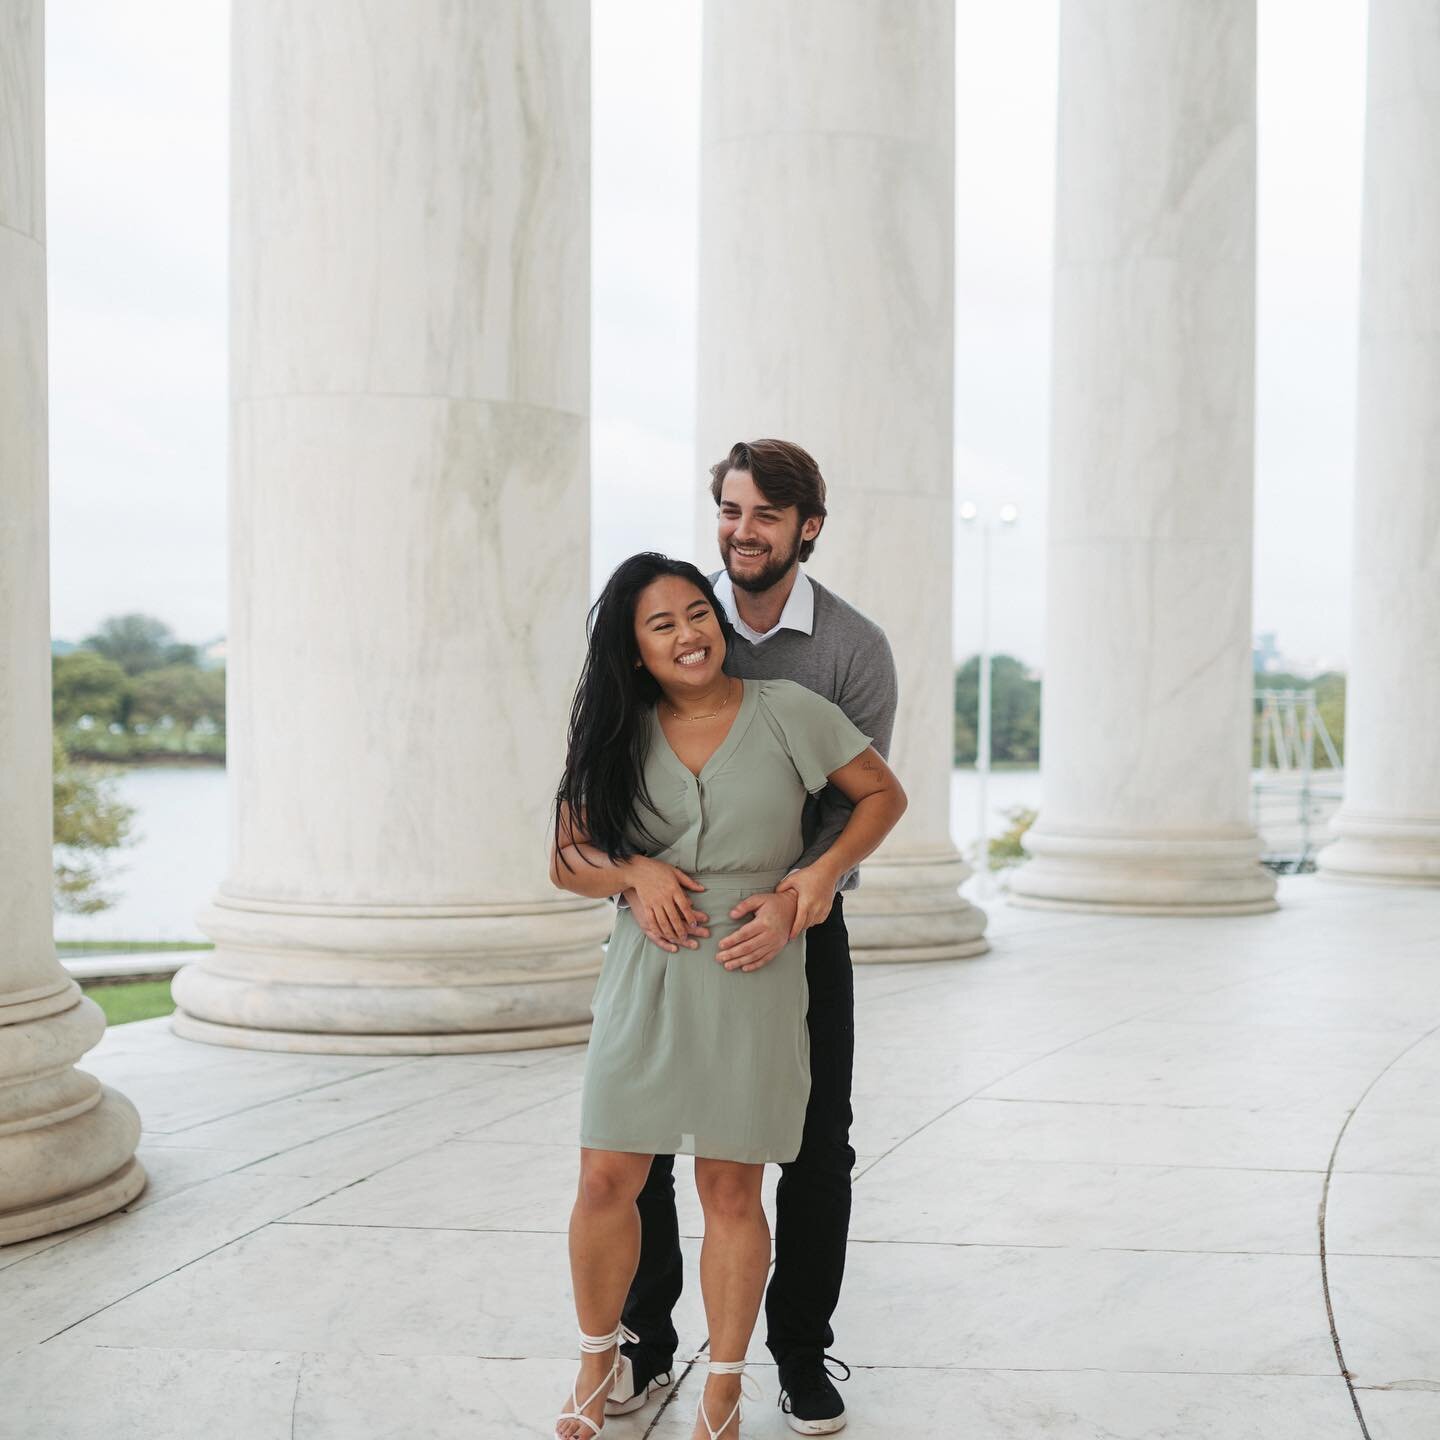 This love story began by meeting through friends and then dating long distance. Now they&rsquo;re living together, right here in Washington DC. They chose to document this chapter of their story at a sentimental location, The Jefferson Memorial. 🩵

